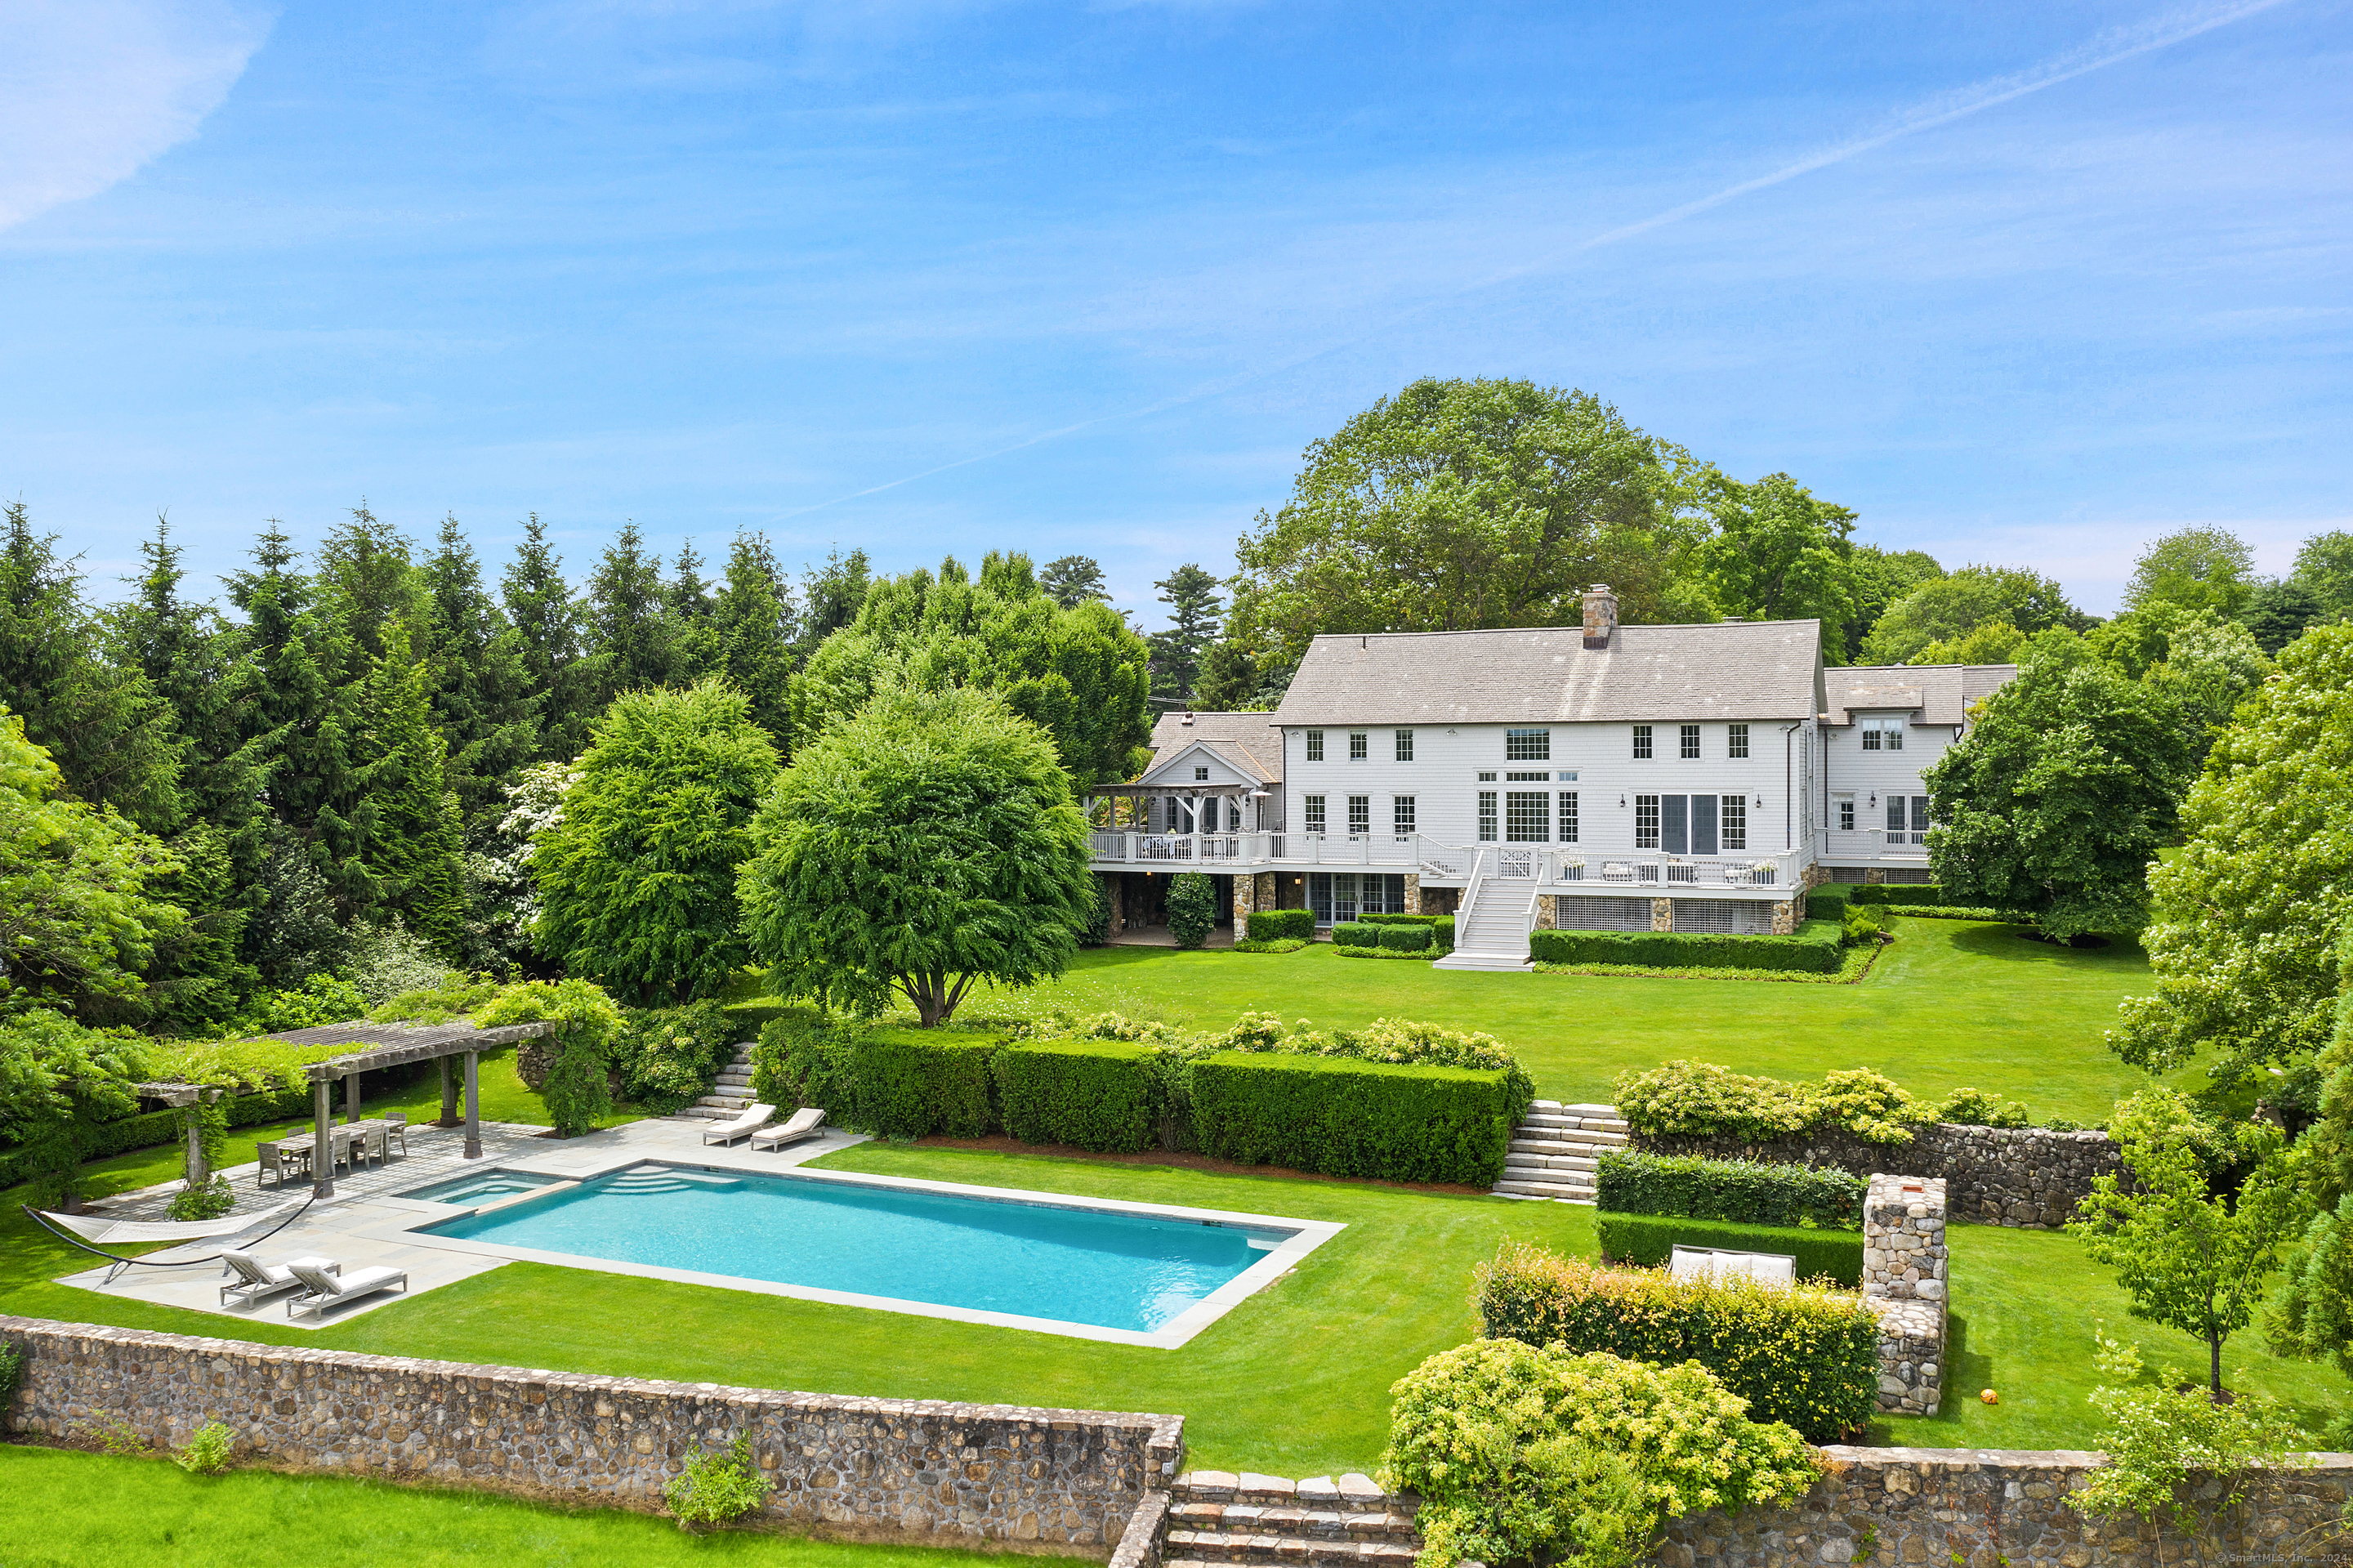 Property for Sale at 945 Oenoke Ridge, New Canaan, Connecticut - Bedrooms: 6 
Bathrooms: 6.5 
Rooms: 10  - $6,895,000